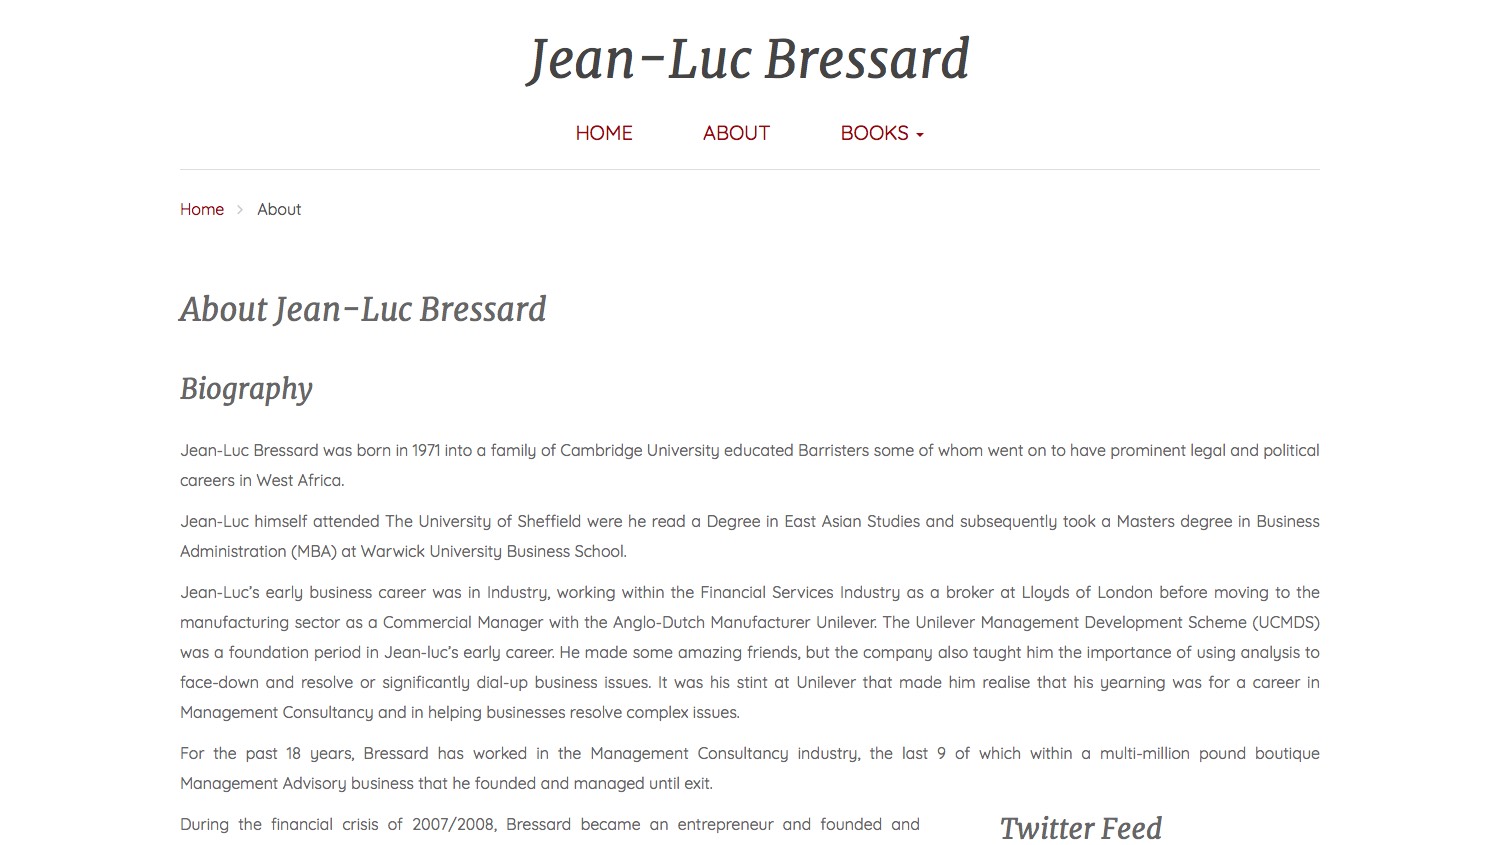 Jean-Luc Bressard. Author, Management Consultant & Property Investor. Born in 1971, business career in financial industry and entrepreneurship.